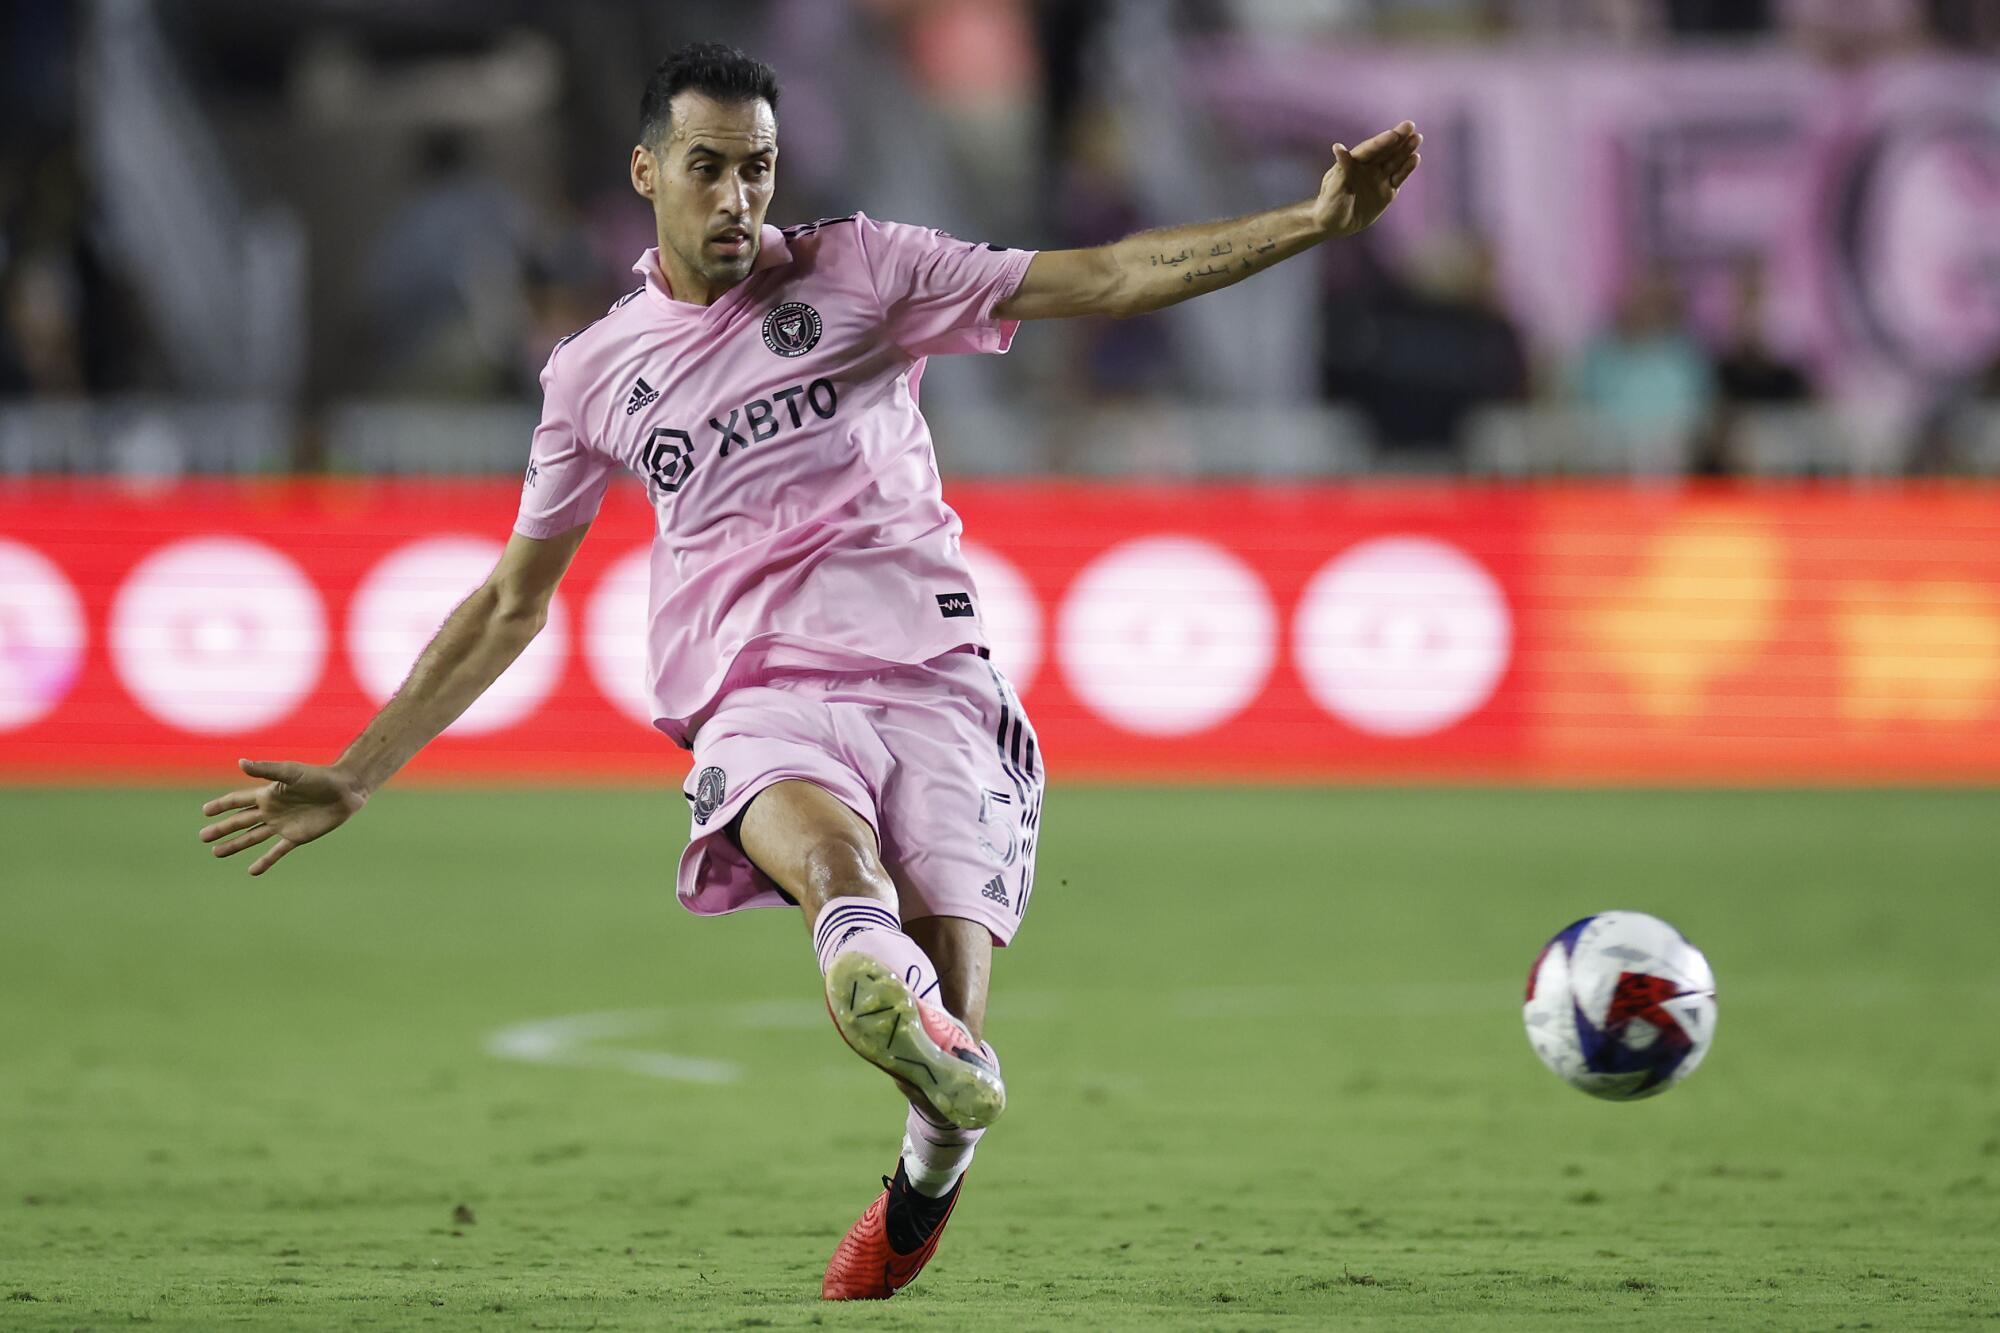 Inter Miami's Sergio Busquets delivers a pass during a game against Nashville SC on Wednesday.